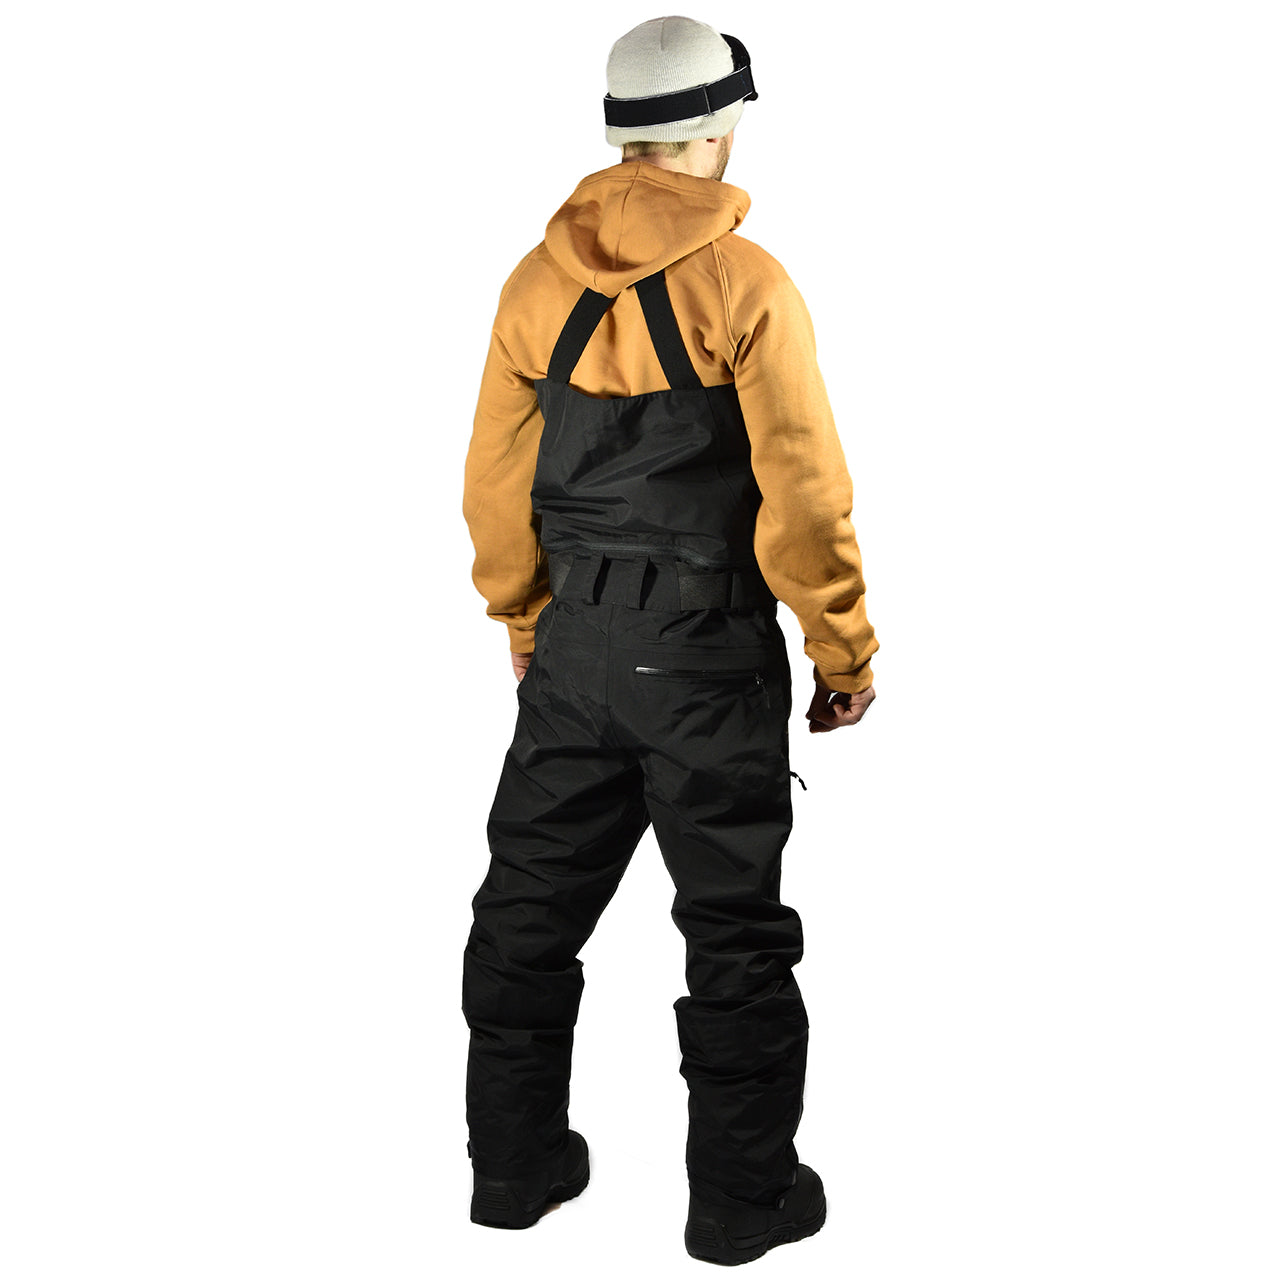 W24 PANTS - BLACK INSULATED